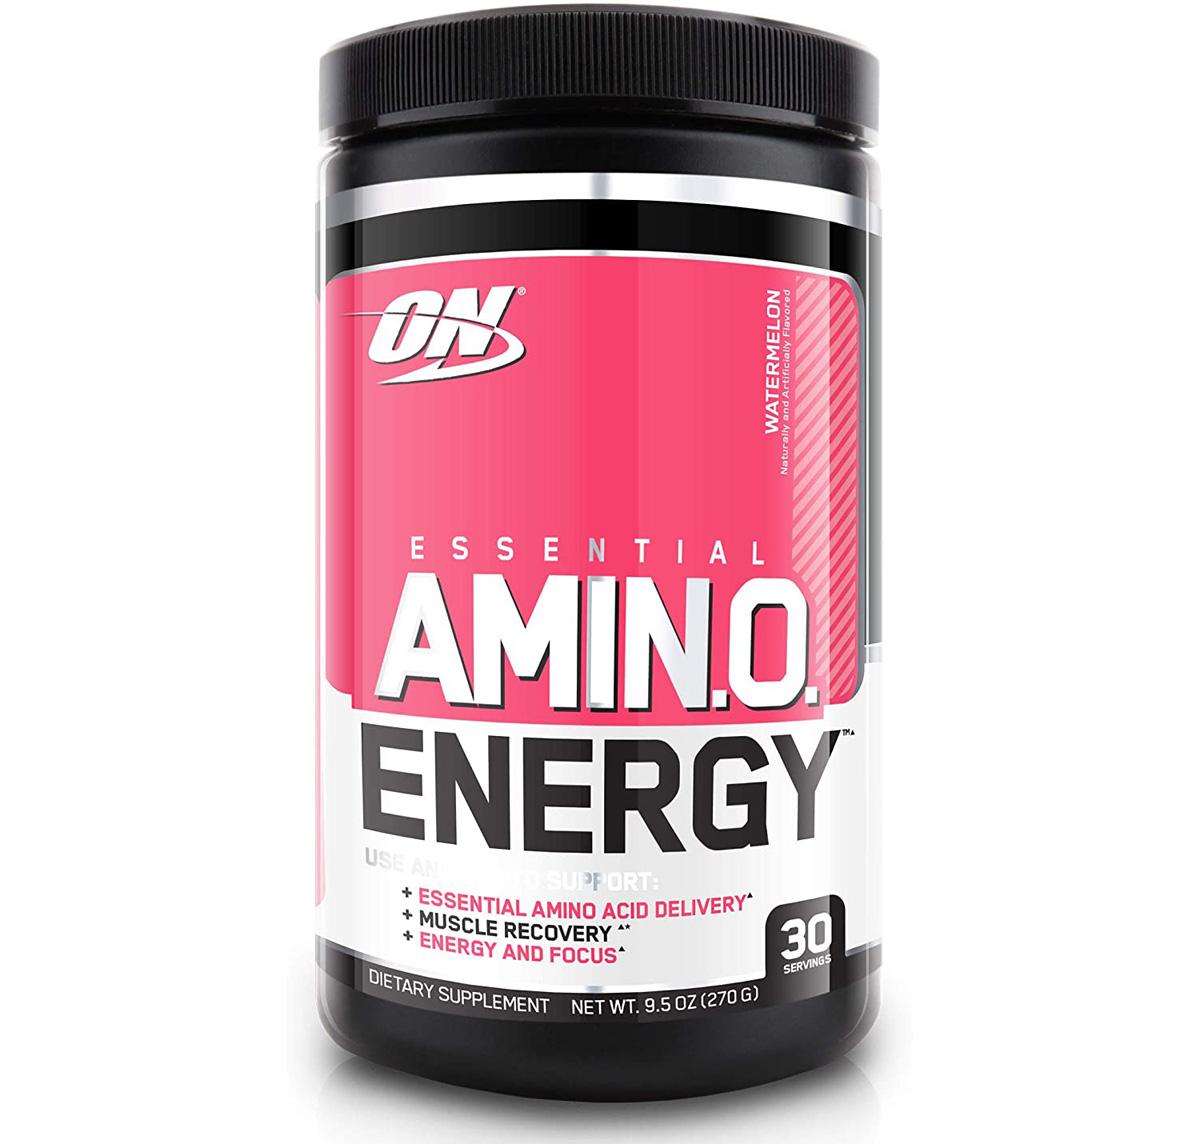 Optimum Nutrition Amino Energy Pre-Workout Energy Powder for $14.30 Shipped